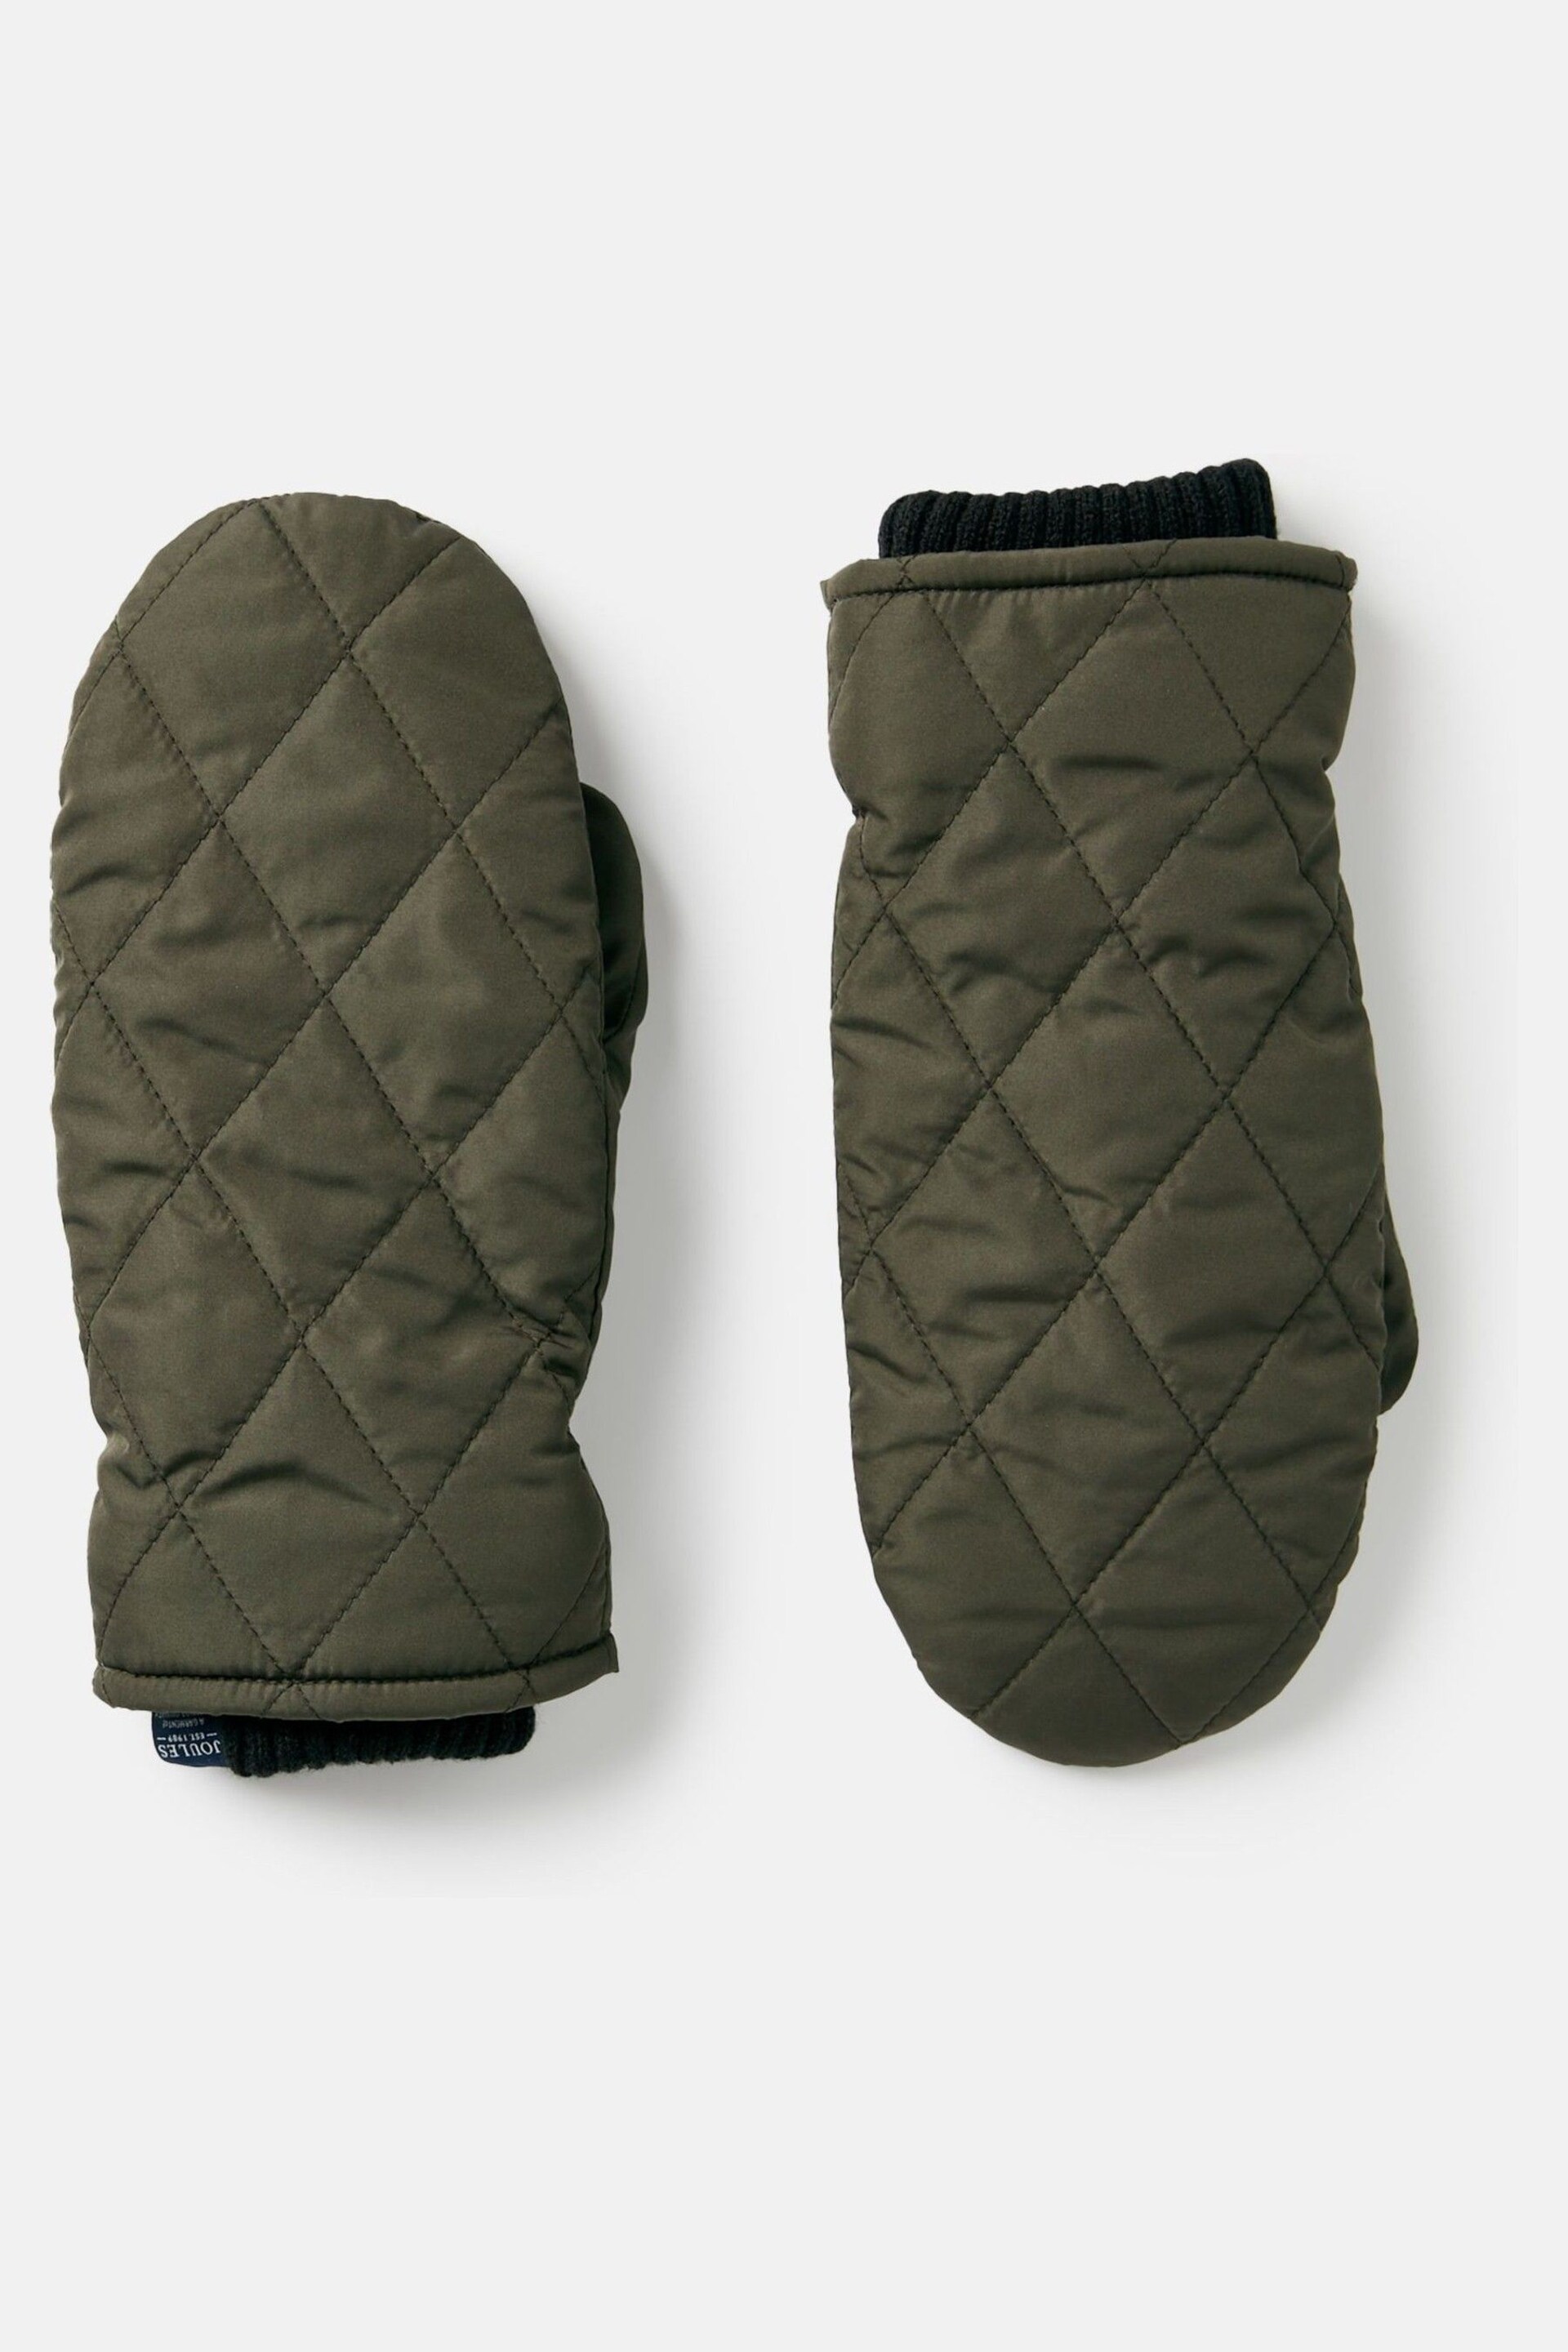 Joules Martha Khaki Green Quilted Mittens - Image 3 of 5